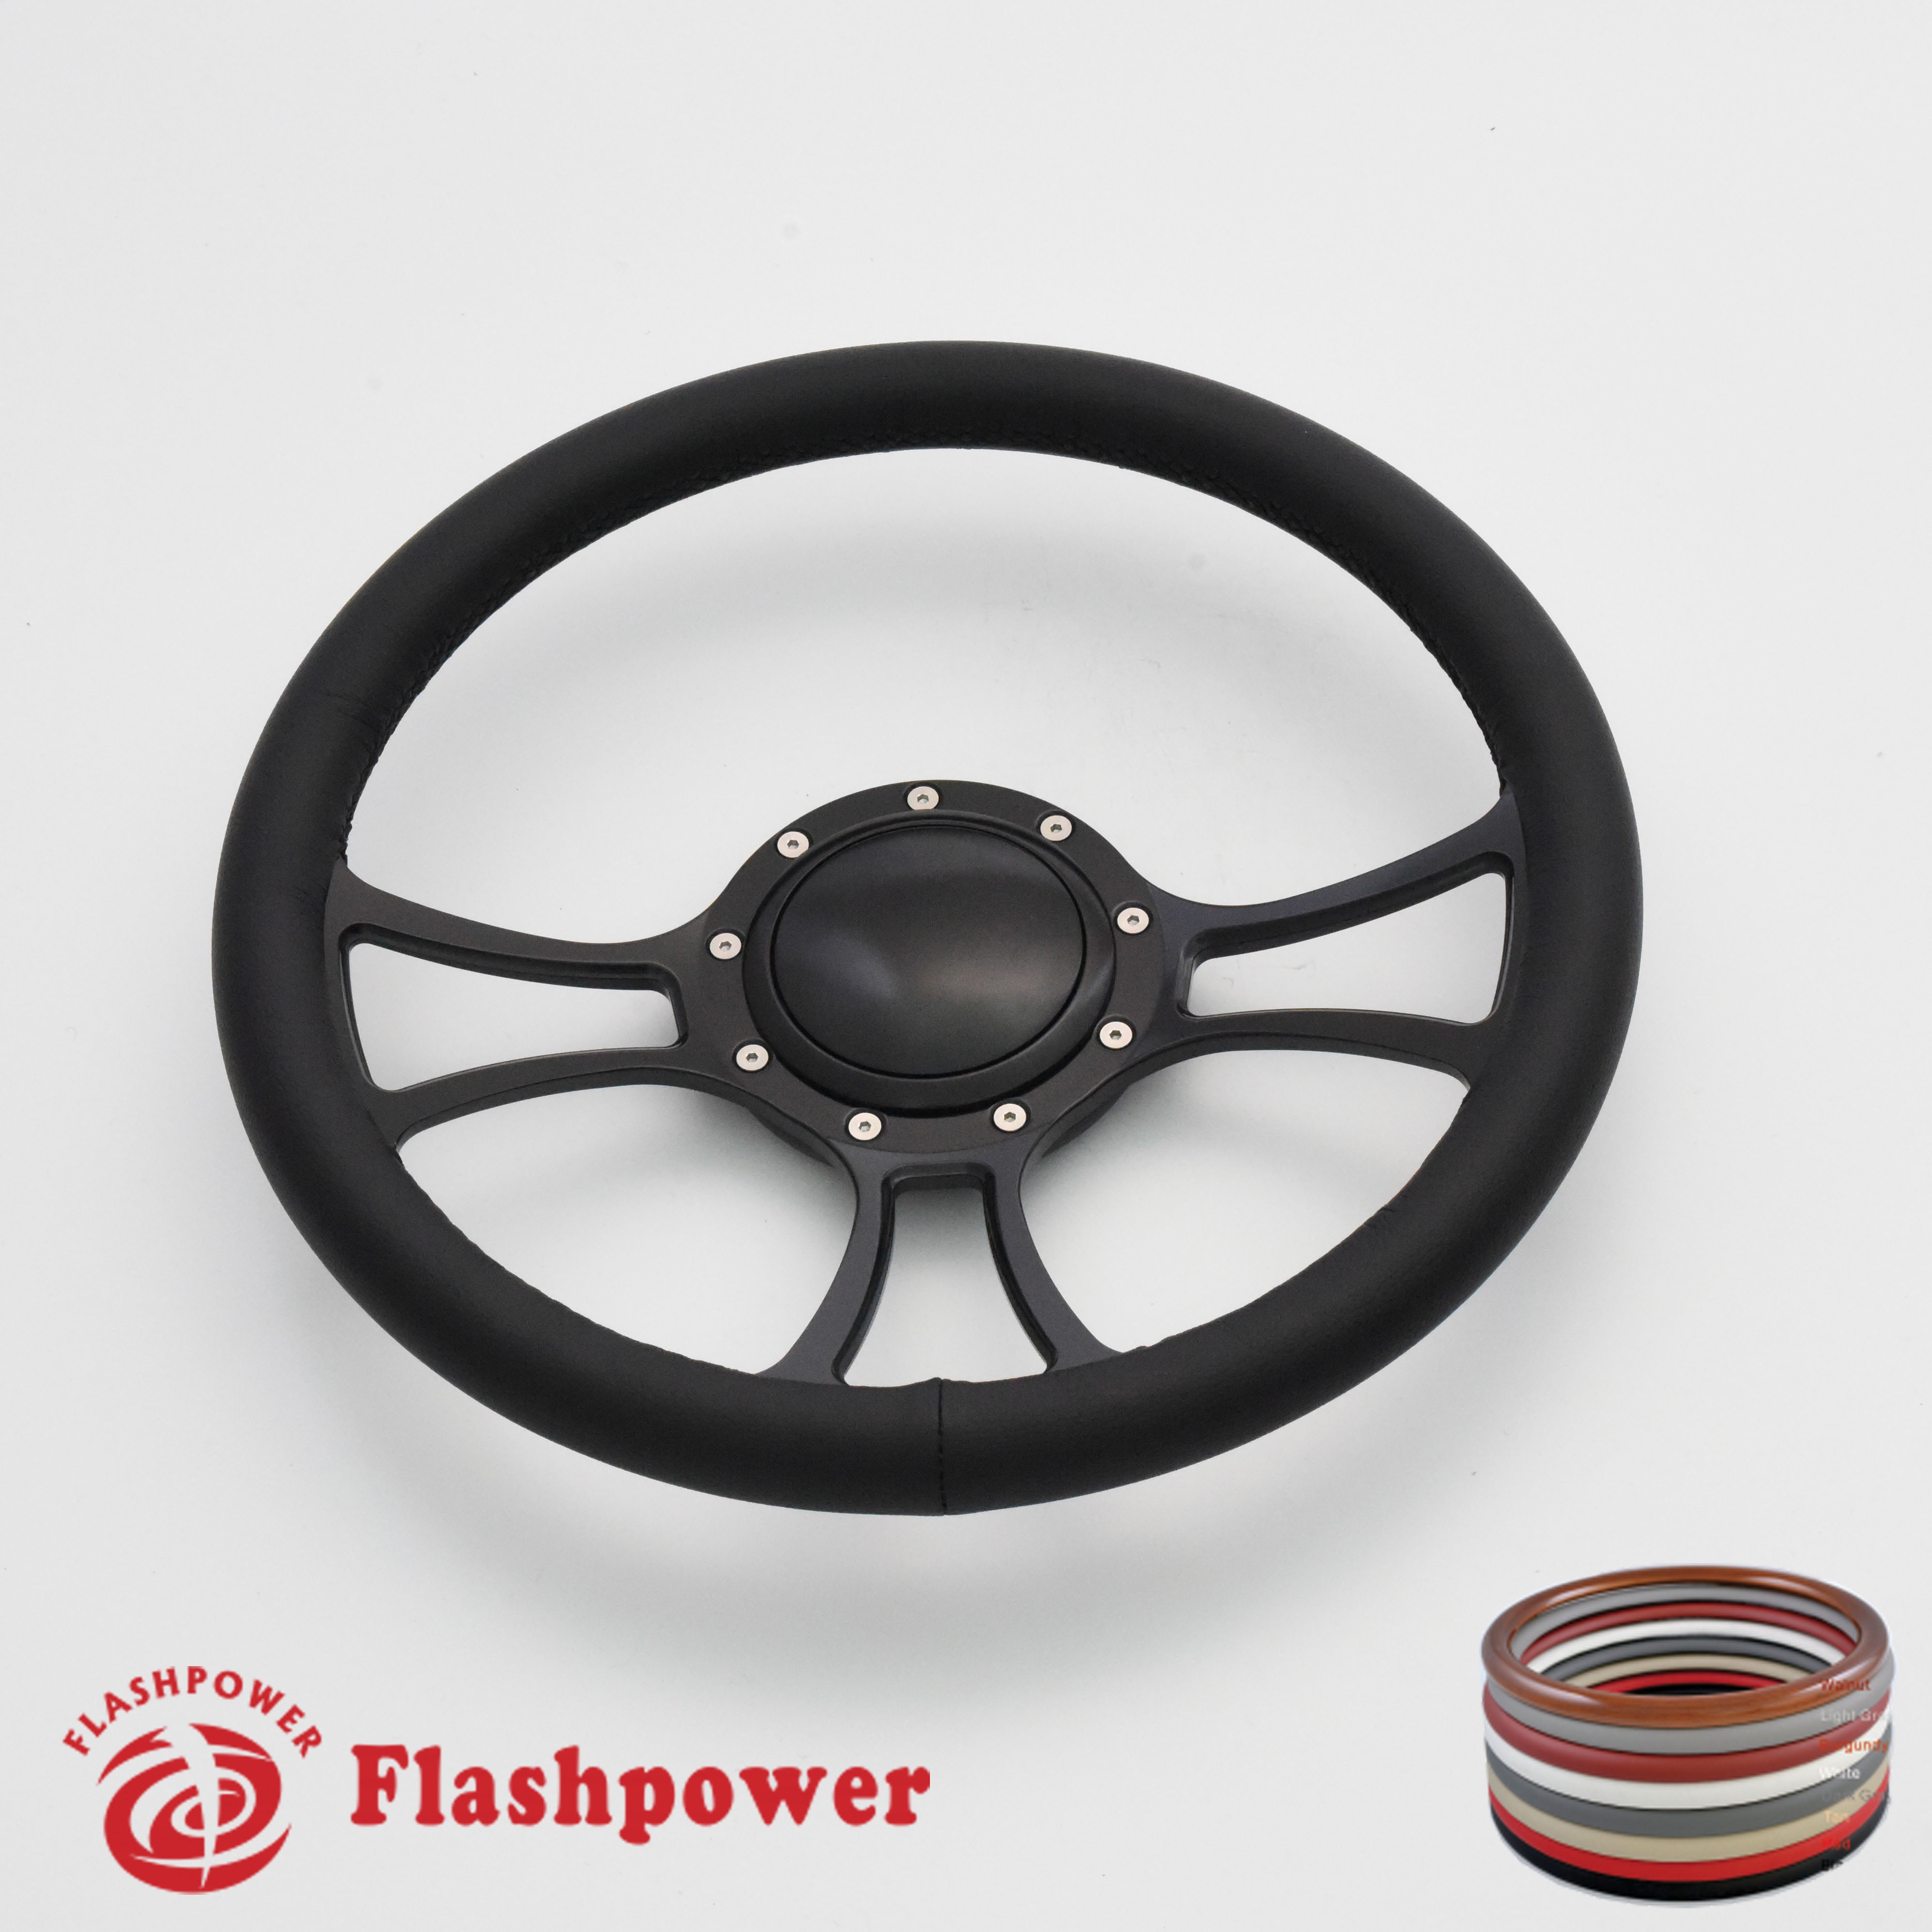 Tan Flashpower 14 Good Times Billet Full Wrap 9 Bolts Steering Wheel with 2 Dish and Horn Button 